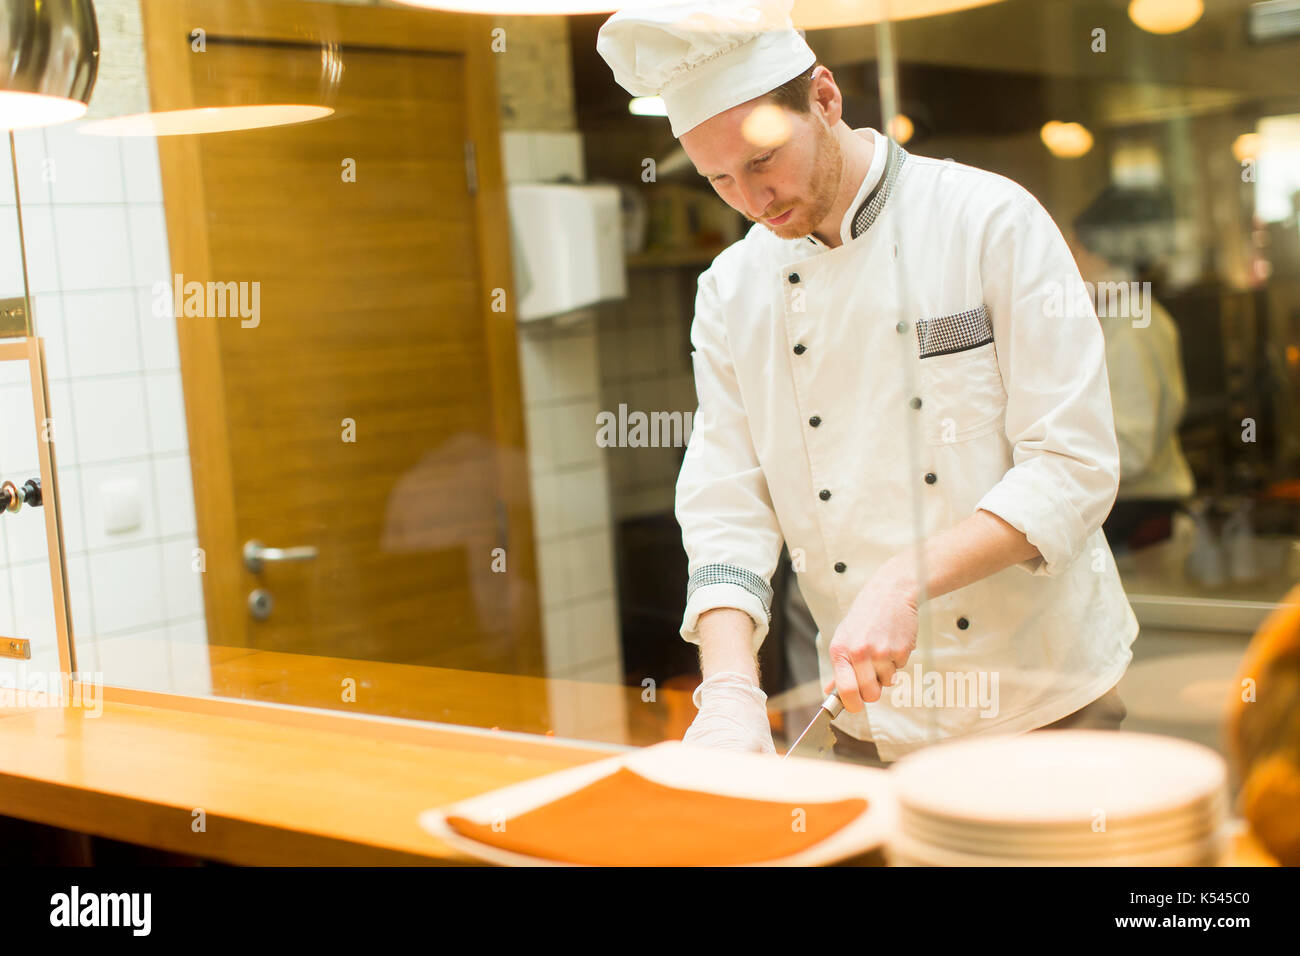 Young chef preparing food in the kitchen Stock Photo